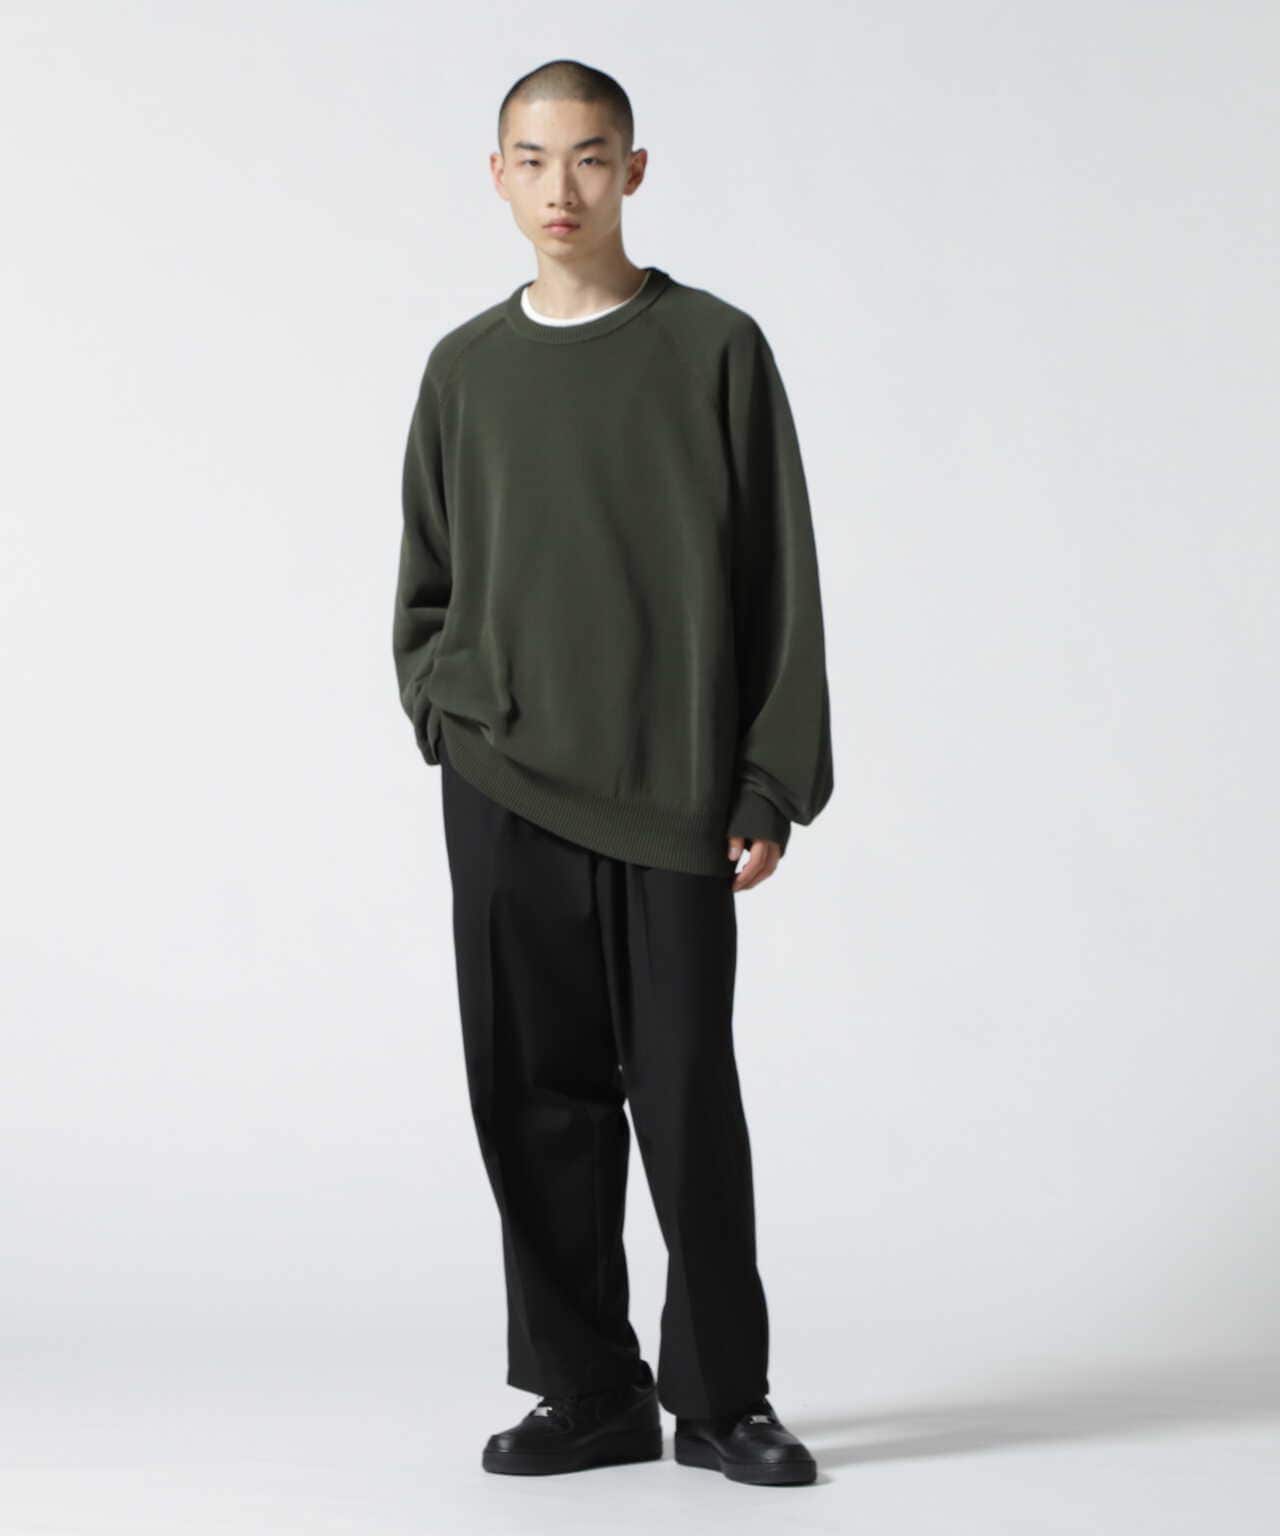 Y-3 M CLASSIC KNIT CREW SWEATER  ビッグロゴ